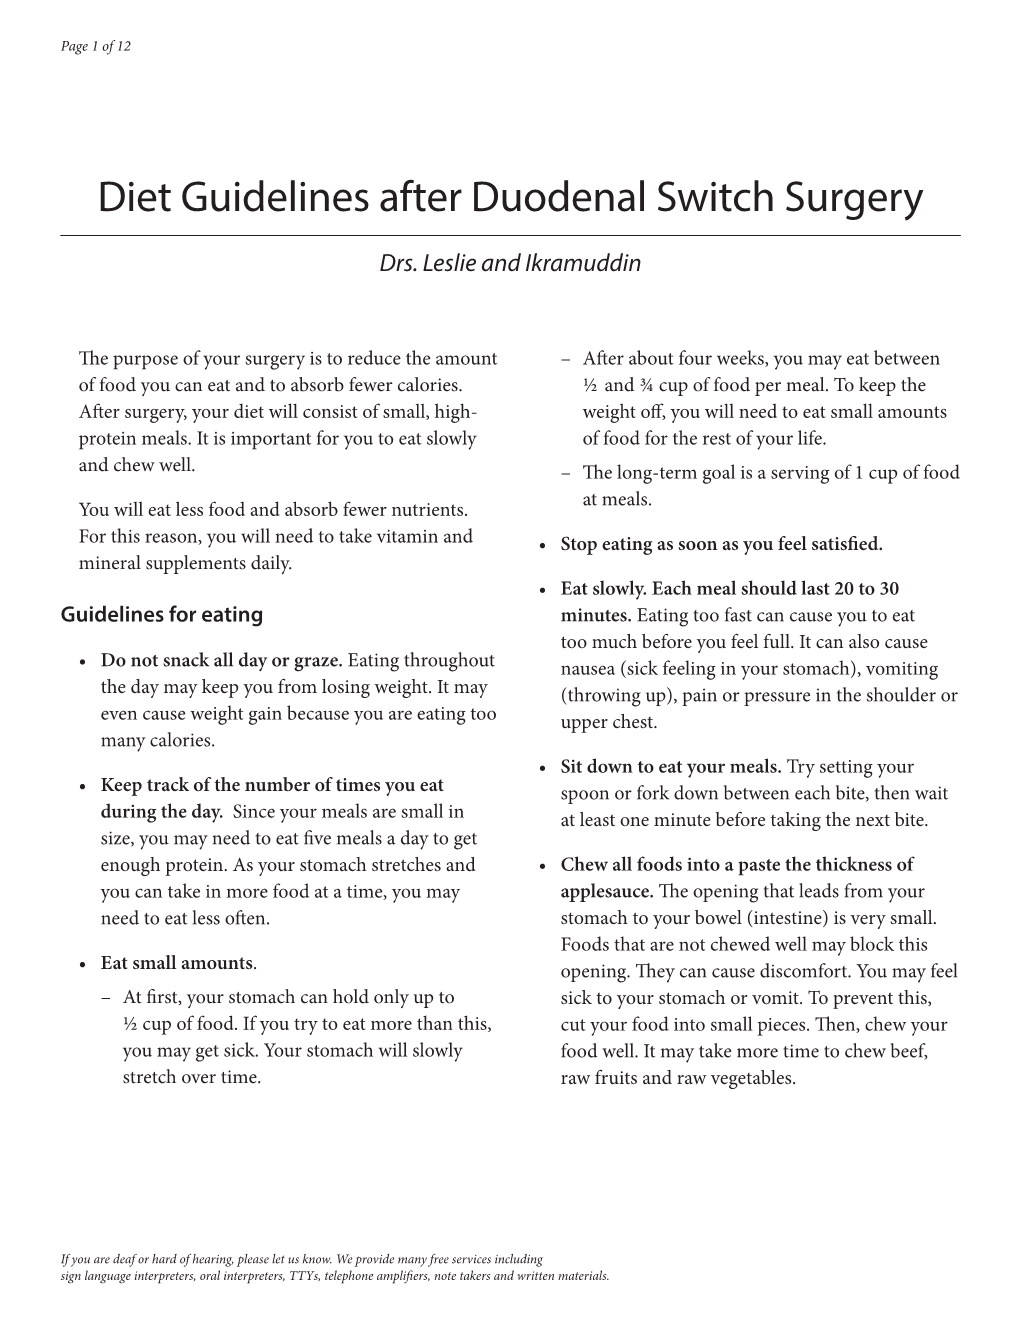 Diet Guidelines After Duodenal Switch Surgery